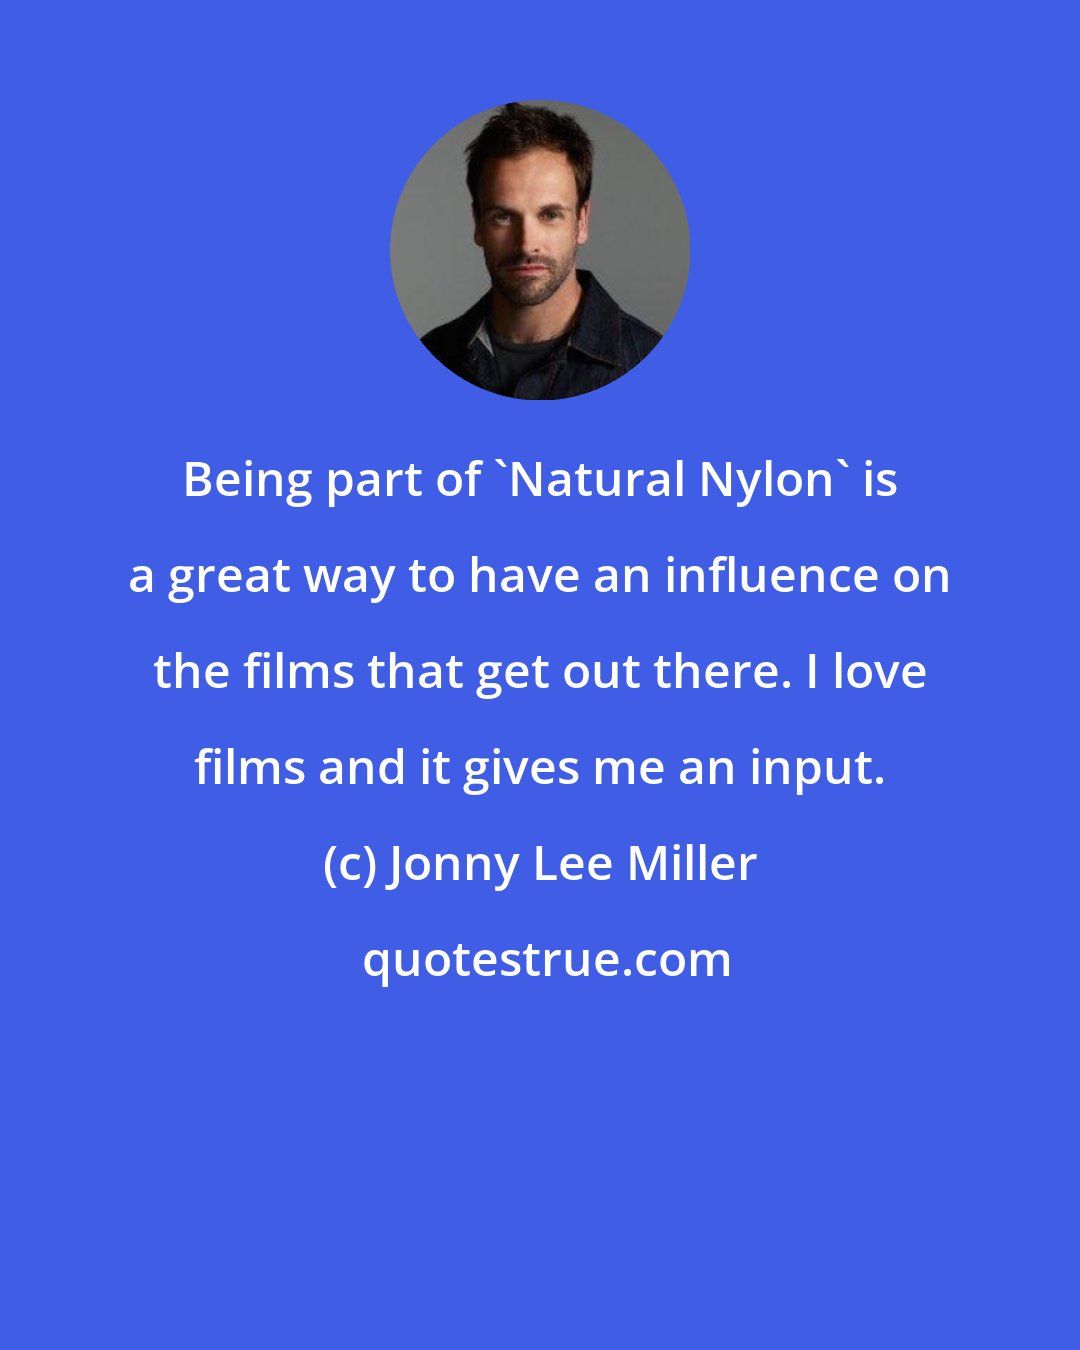 Jonny Lee Miller: Being part of 'Natural Nylon' is a great way to have an influence on the films that get out there. I love films and it gives me an input.